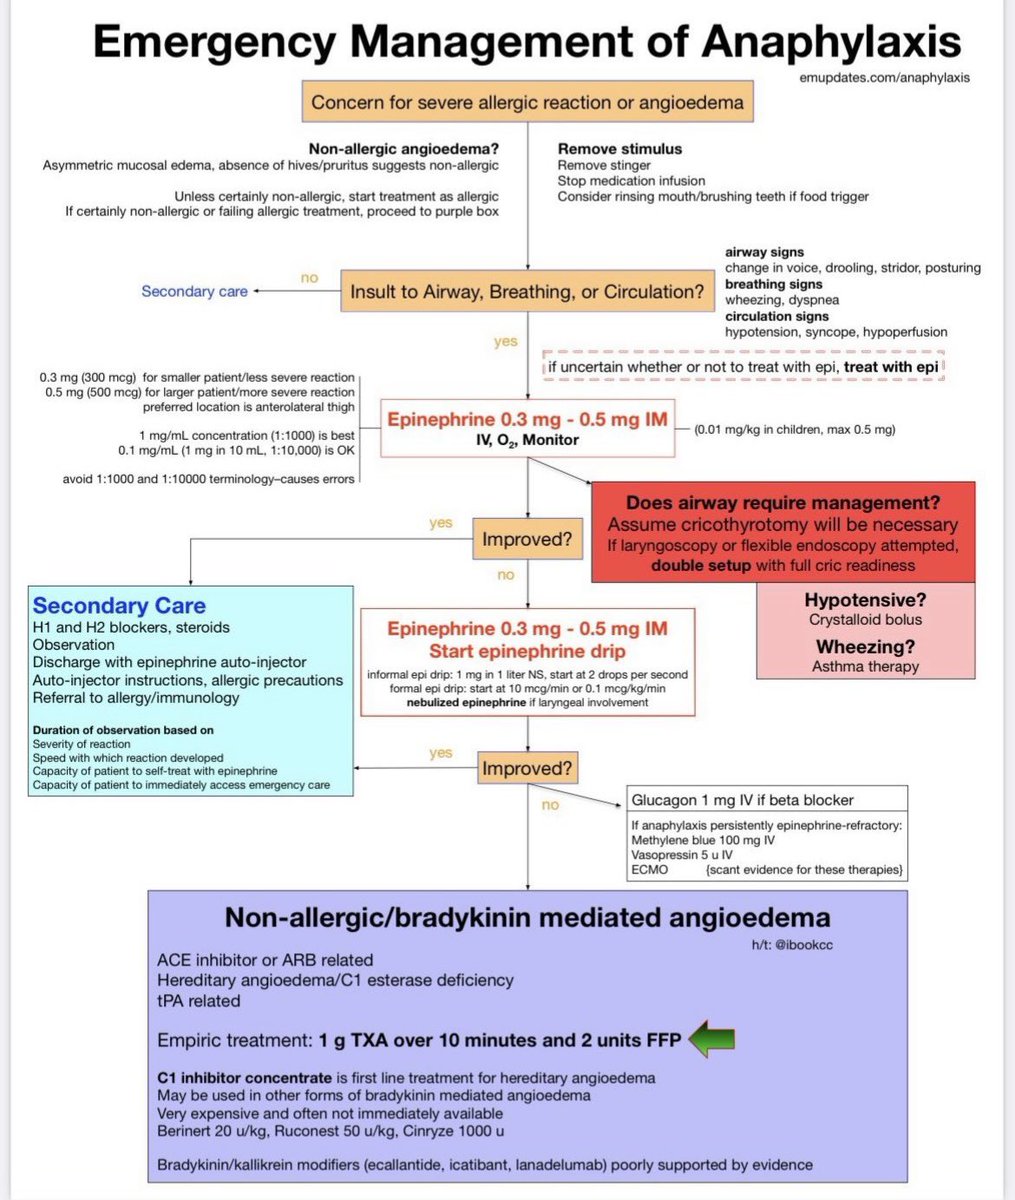 Emergency Management of Anaphylaxis 

📎A treatment map + Bonus section of non-allergic angioedema.

#MedEd #FOAMed #medtwitter #emergency #medicine #ER #medicaleducation #MedicalStudents 
#LiverTwitter #MedStudentTwitter 
#medicalpractice #icu #criticalcare #anaphylaxis